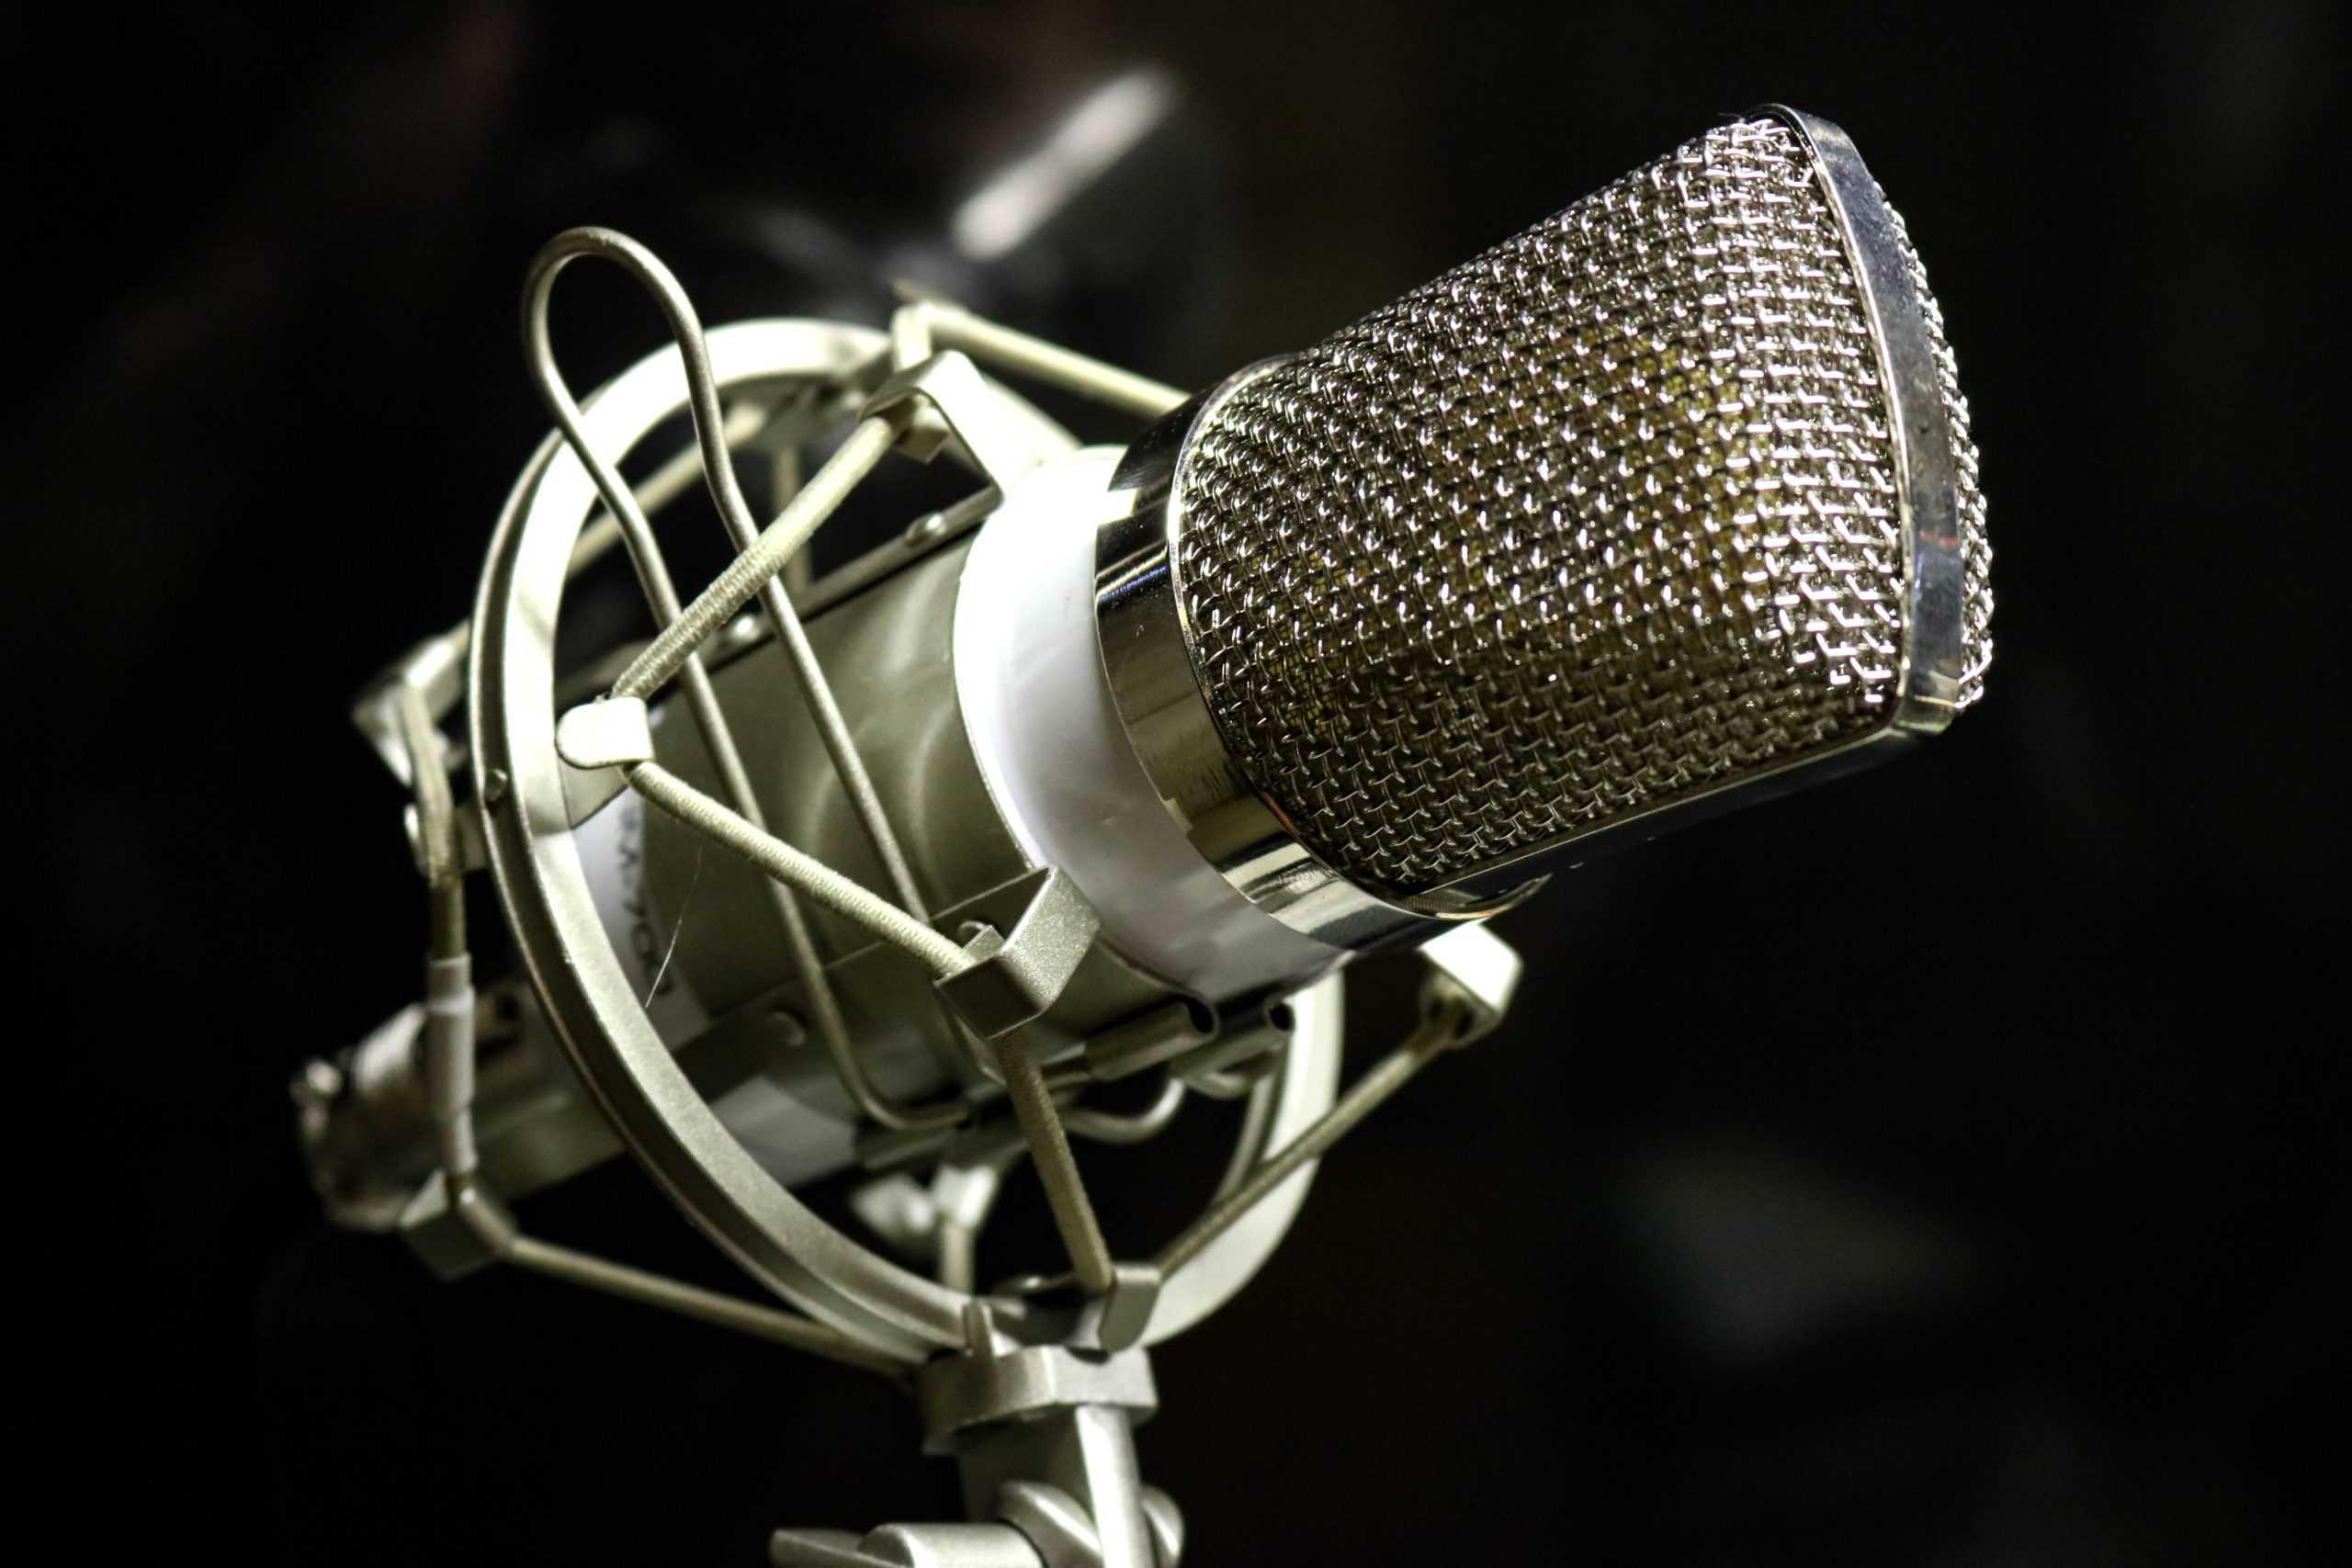 Tips for using voiceover mics